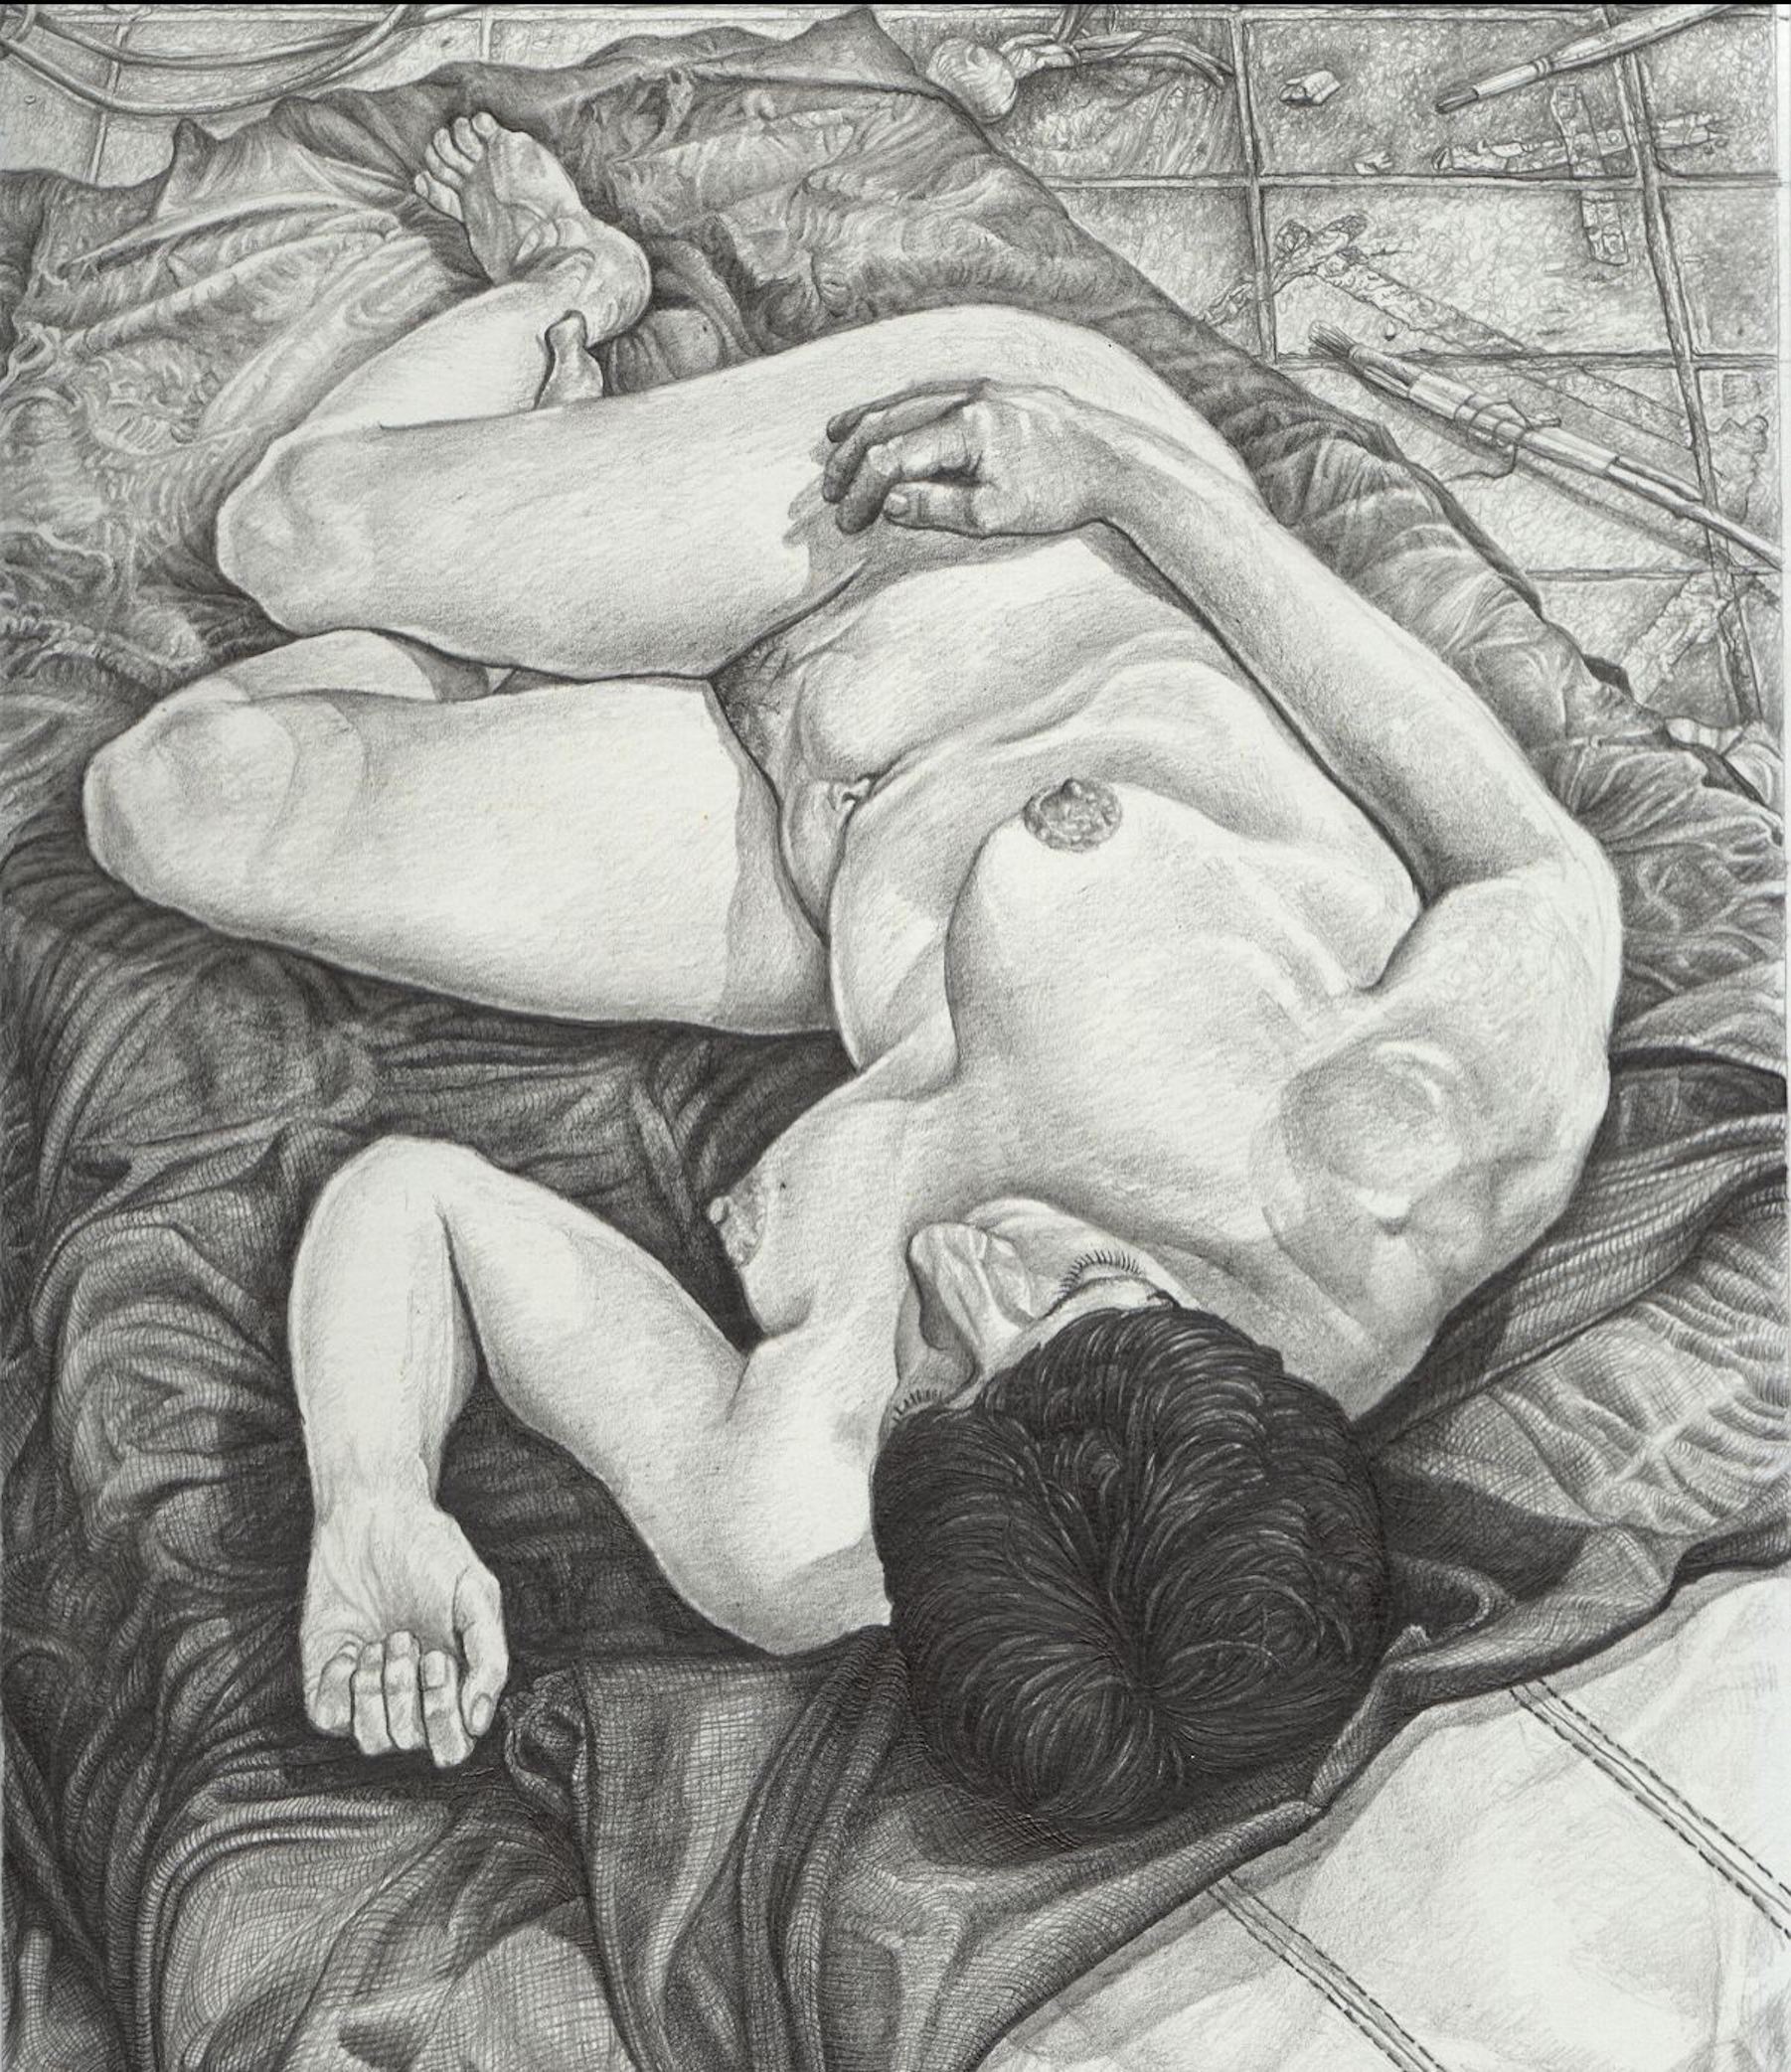 Black and white painting of a naked woman reclining on a bed